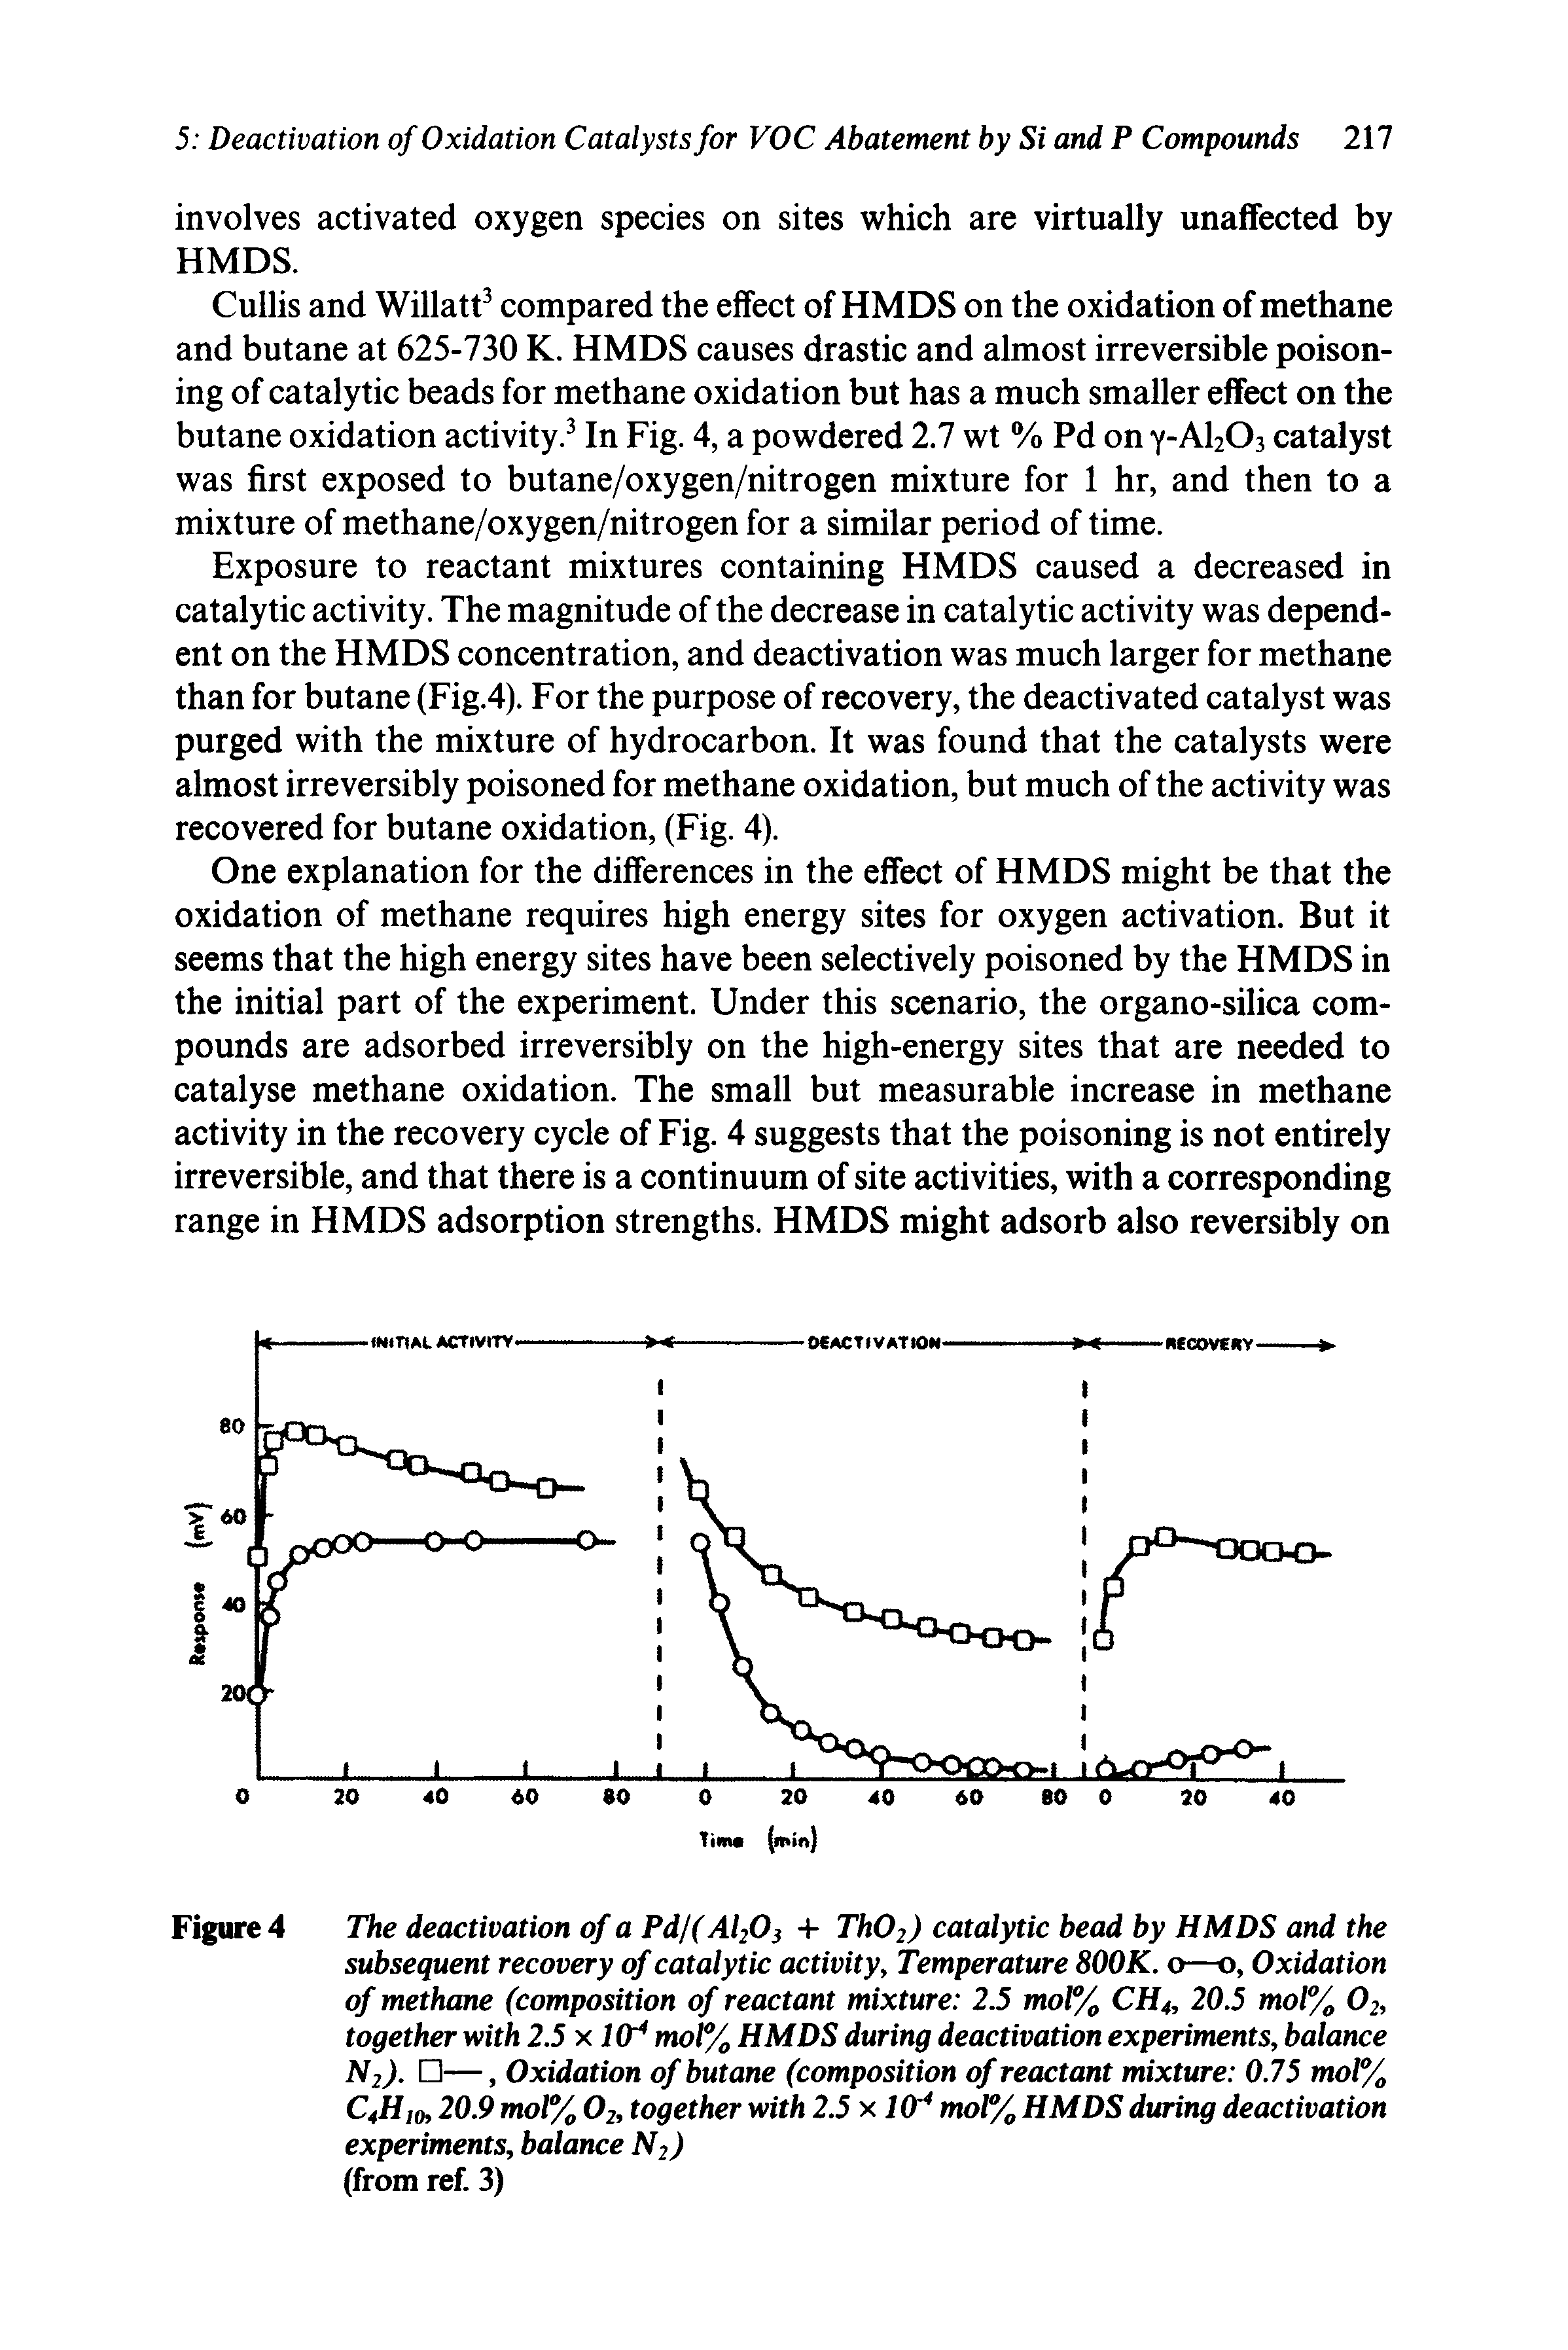 Figure 4 The deactivation of a PdK Al20 + Th02) catalytic bead by HMDS and the subsequent recovery of catalytic activity. Temperature 800K. o—o, Oxidation of methane (composition of reactant mixture 2.5 mol% CH4, 20.5 mol% O2, together with 2.5 x lOr moP/o HMDS during deactivation experiments, balance N2). —, Oxidation of butane (composition of reactant mixture 0.75 moP/o C4H10,20.9 moP/o O2, together with 2.5 x 10" nwl% HMDS during deactivation experiments, balance N2)...